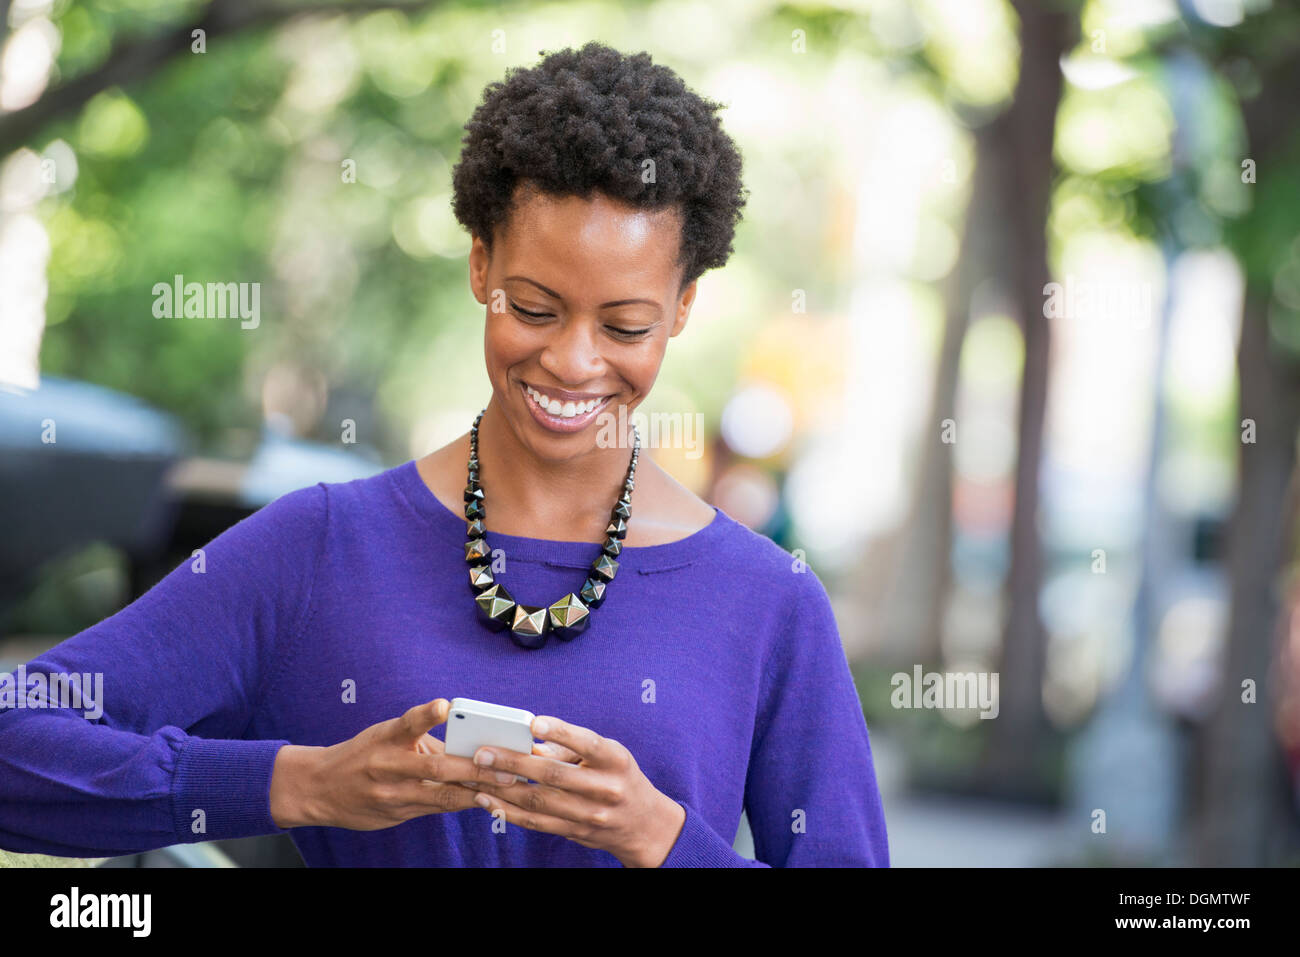 City. A woman in a purple dress checking her smart phone. Stock Photo